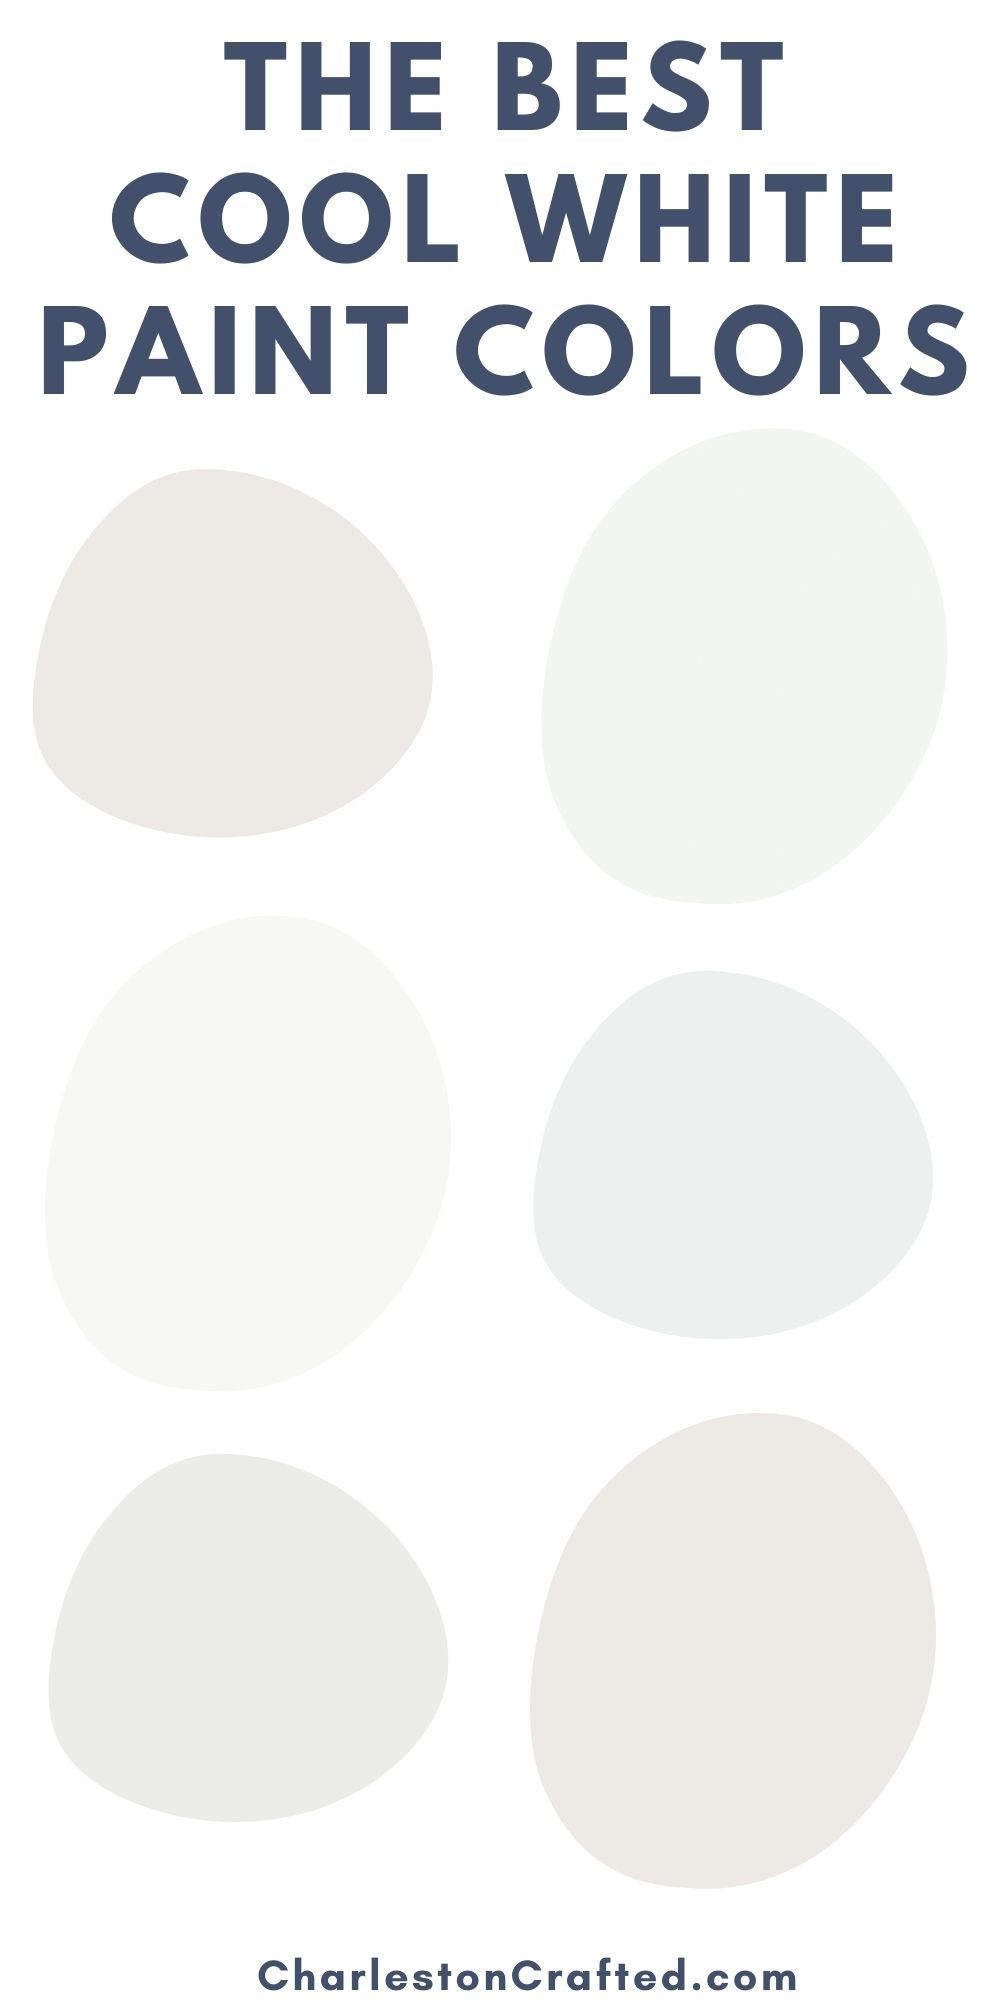 The Best White Paint Colors For Every Home - Studio McGee